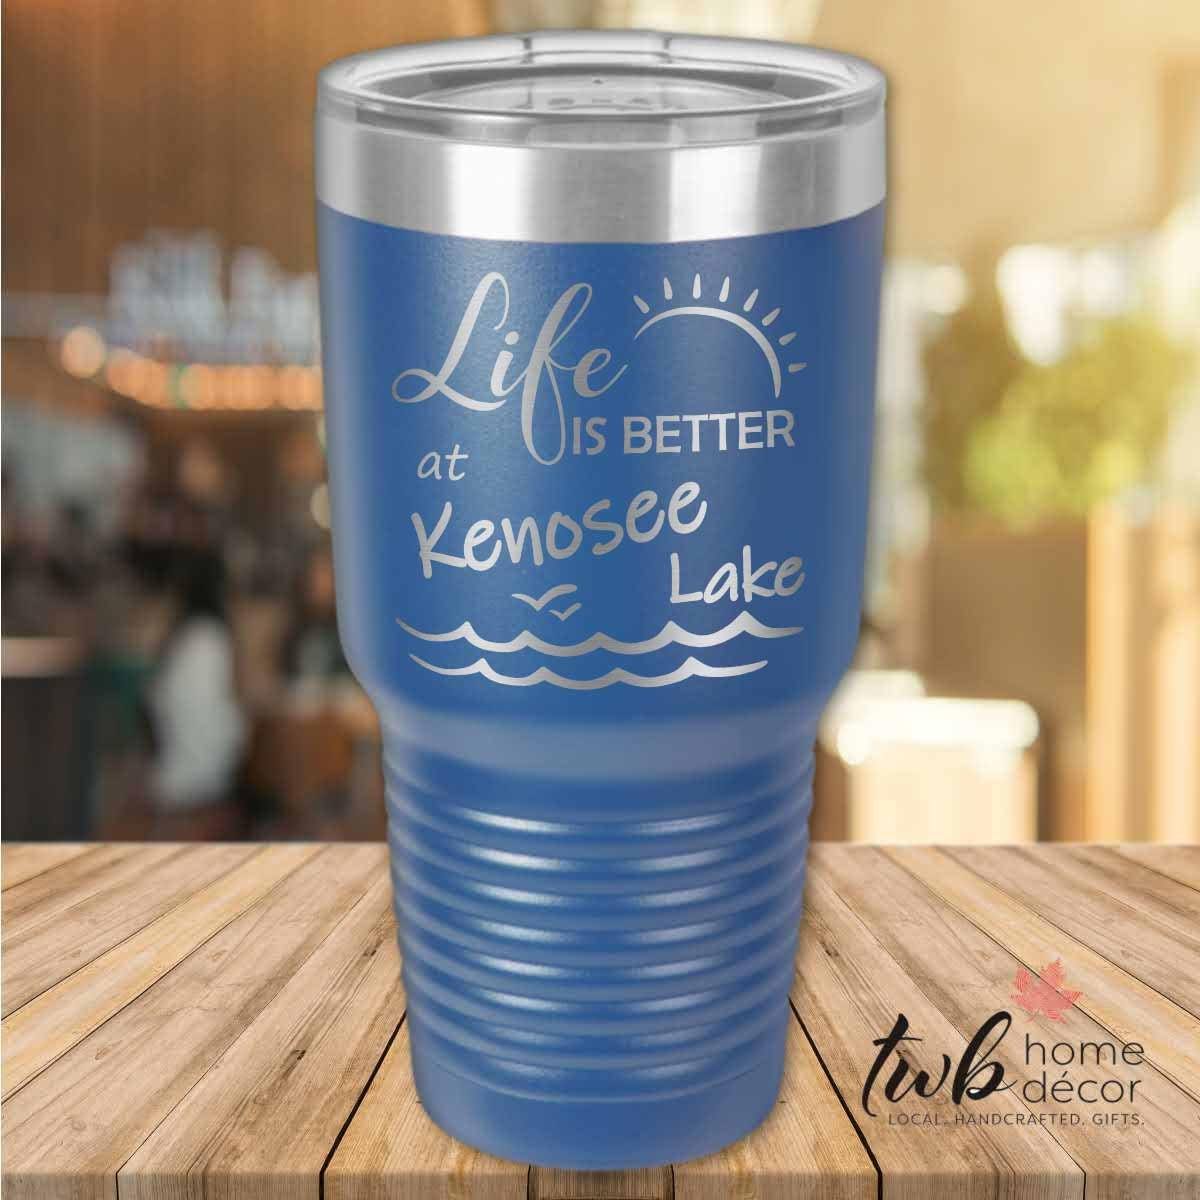 Life is Better at Kenosee Lake Thermal - TWB Home Decor